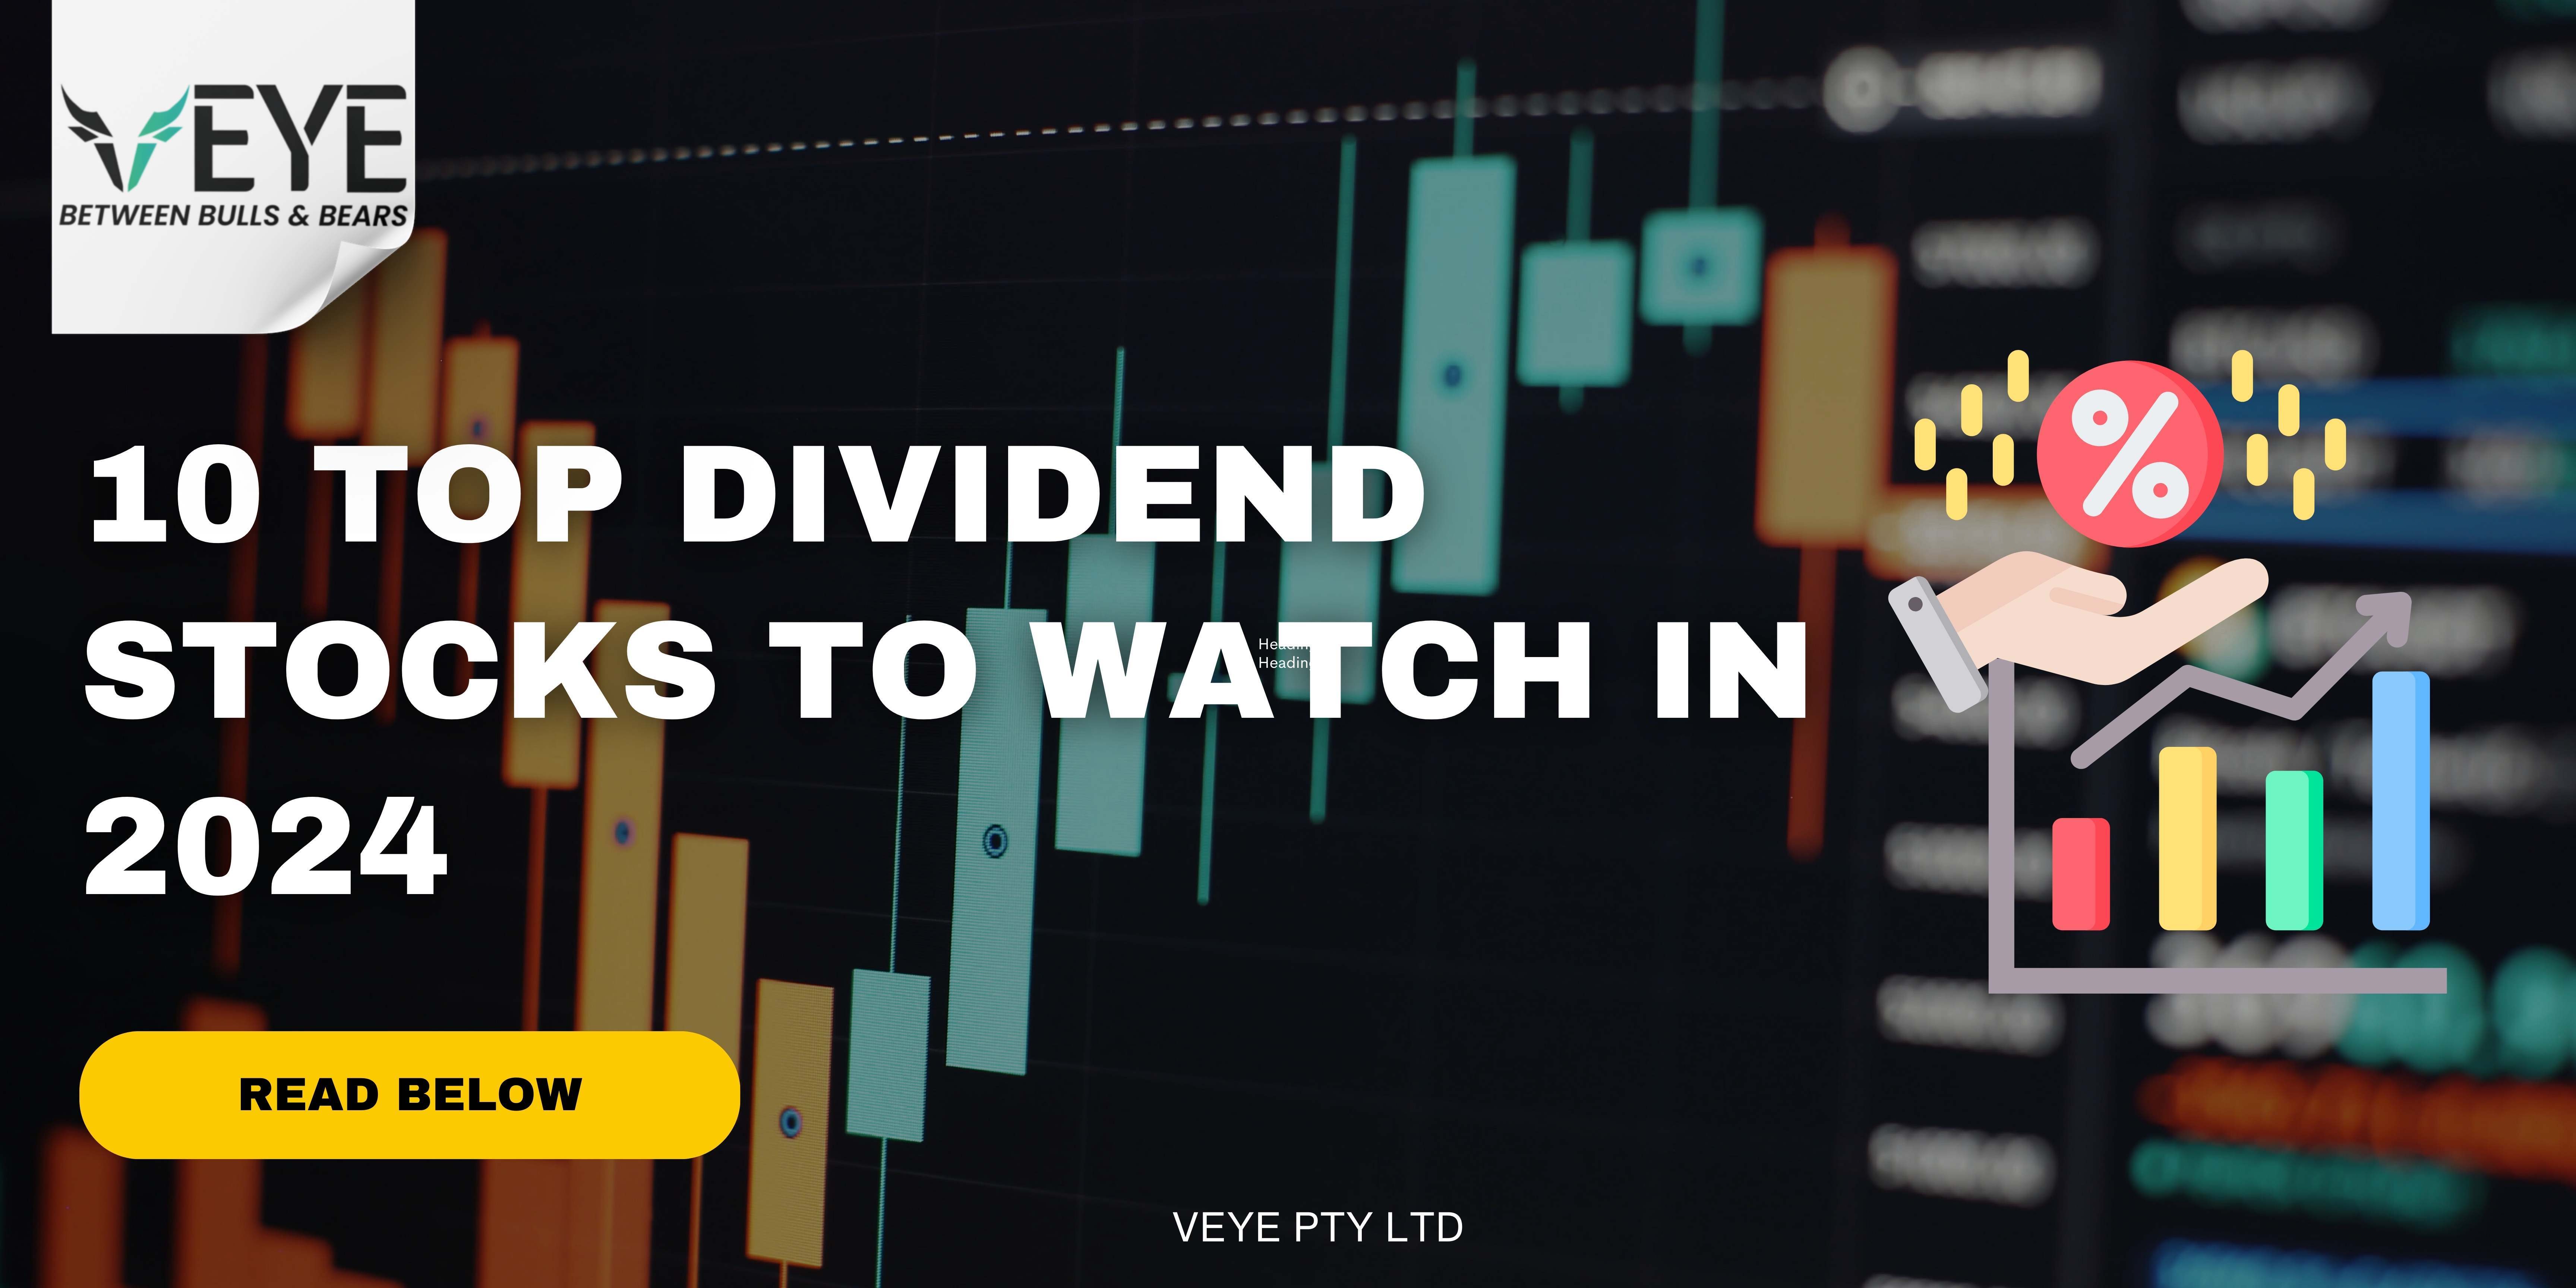 10 Top Dividend Stocks to Watch in 2024?